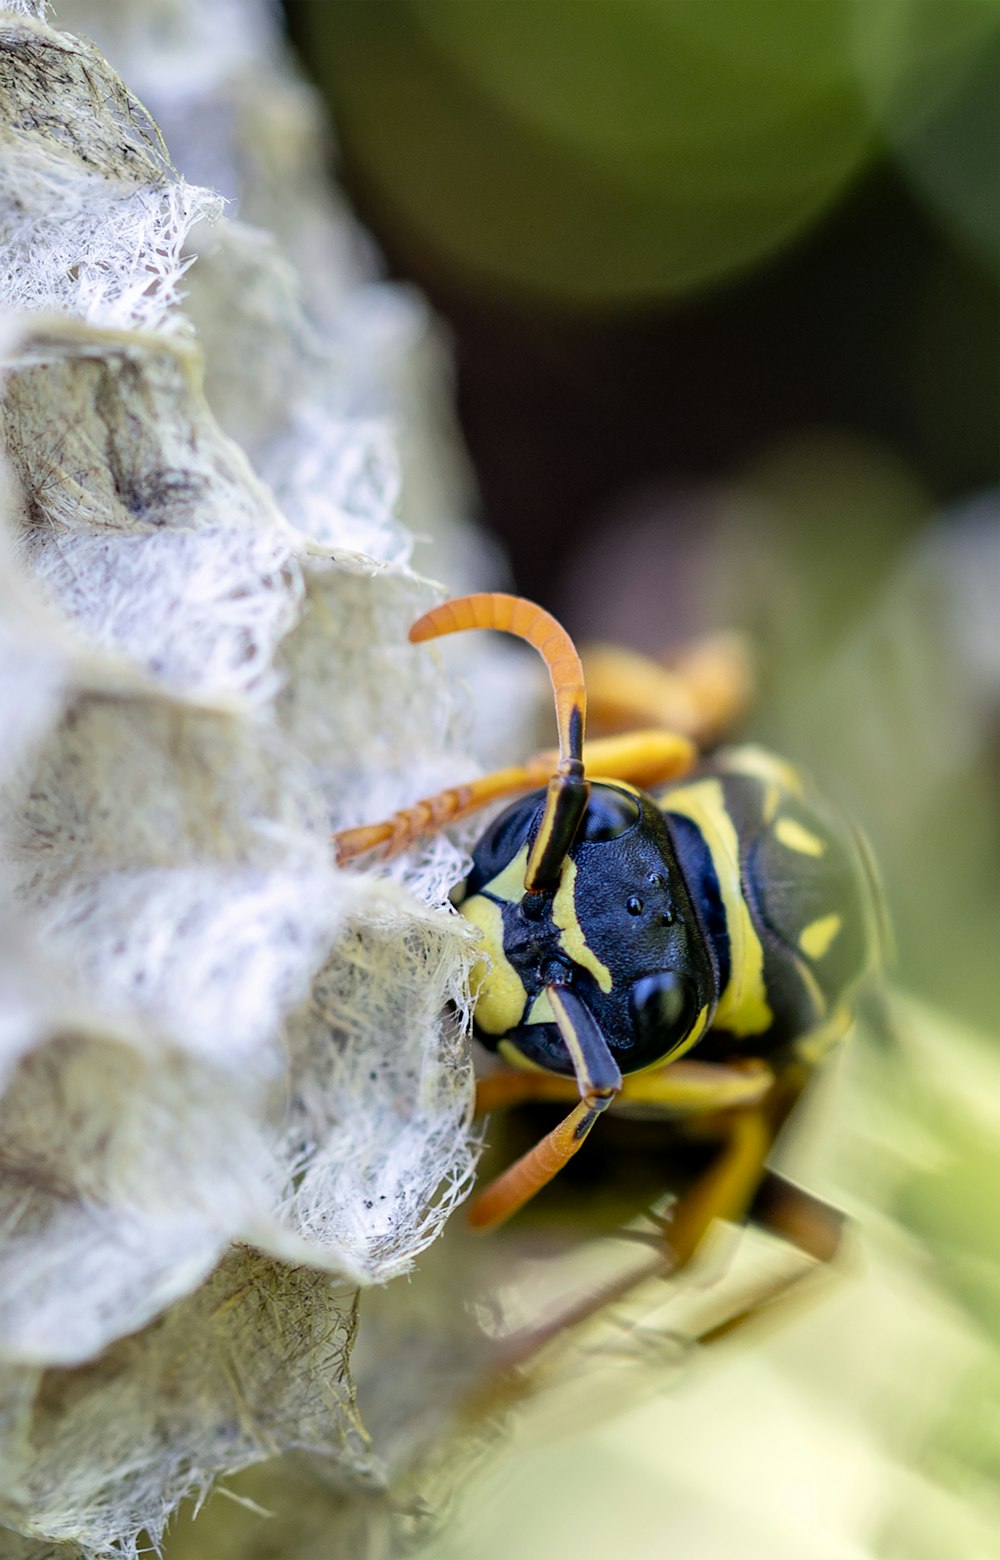 a close up of a yellow and black insect on a plant